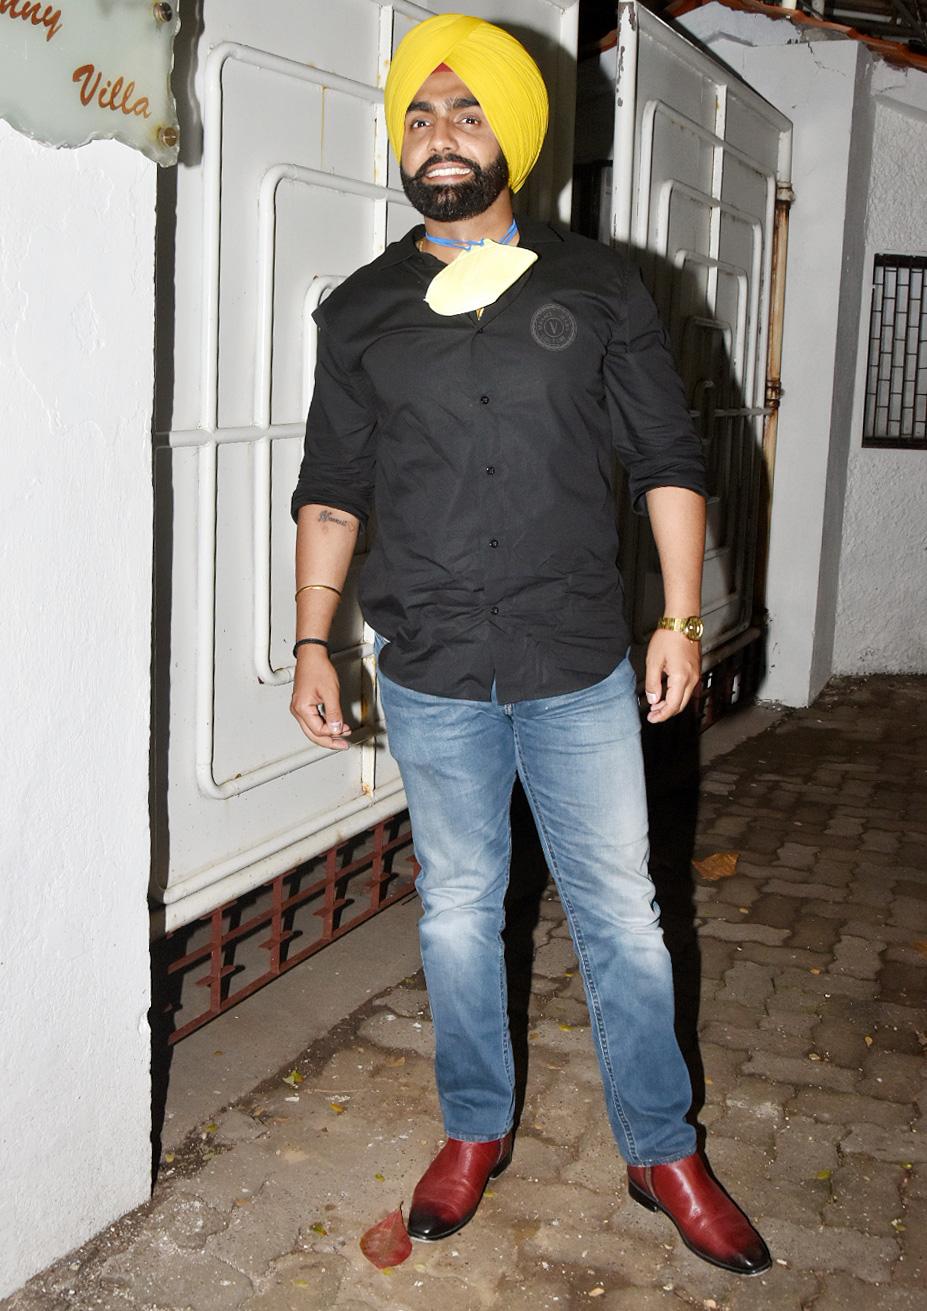 Ammy Virk also attended the special screening of 'Bhuj: The Pride Of India' at the preview theatre in Juhu. Ammy plays Flight Officer Vikram Singh Baj Jethaaz in the film.